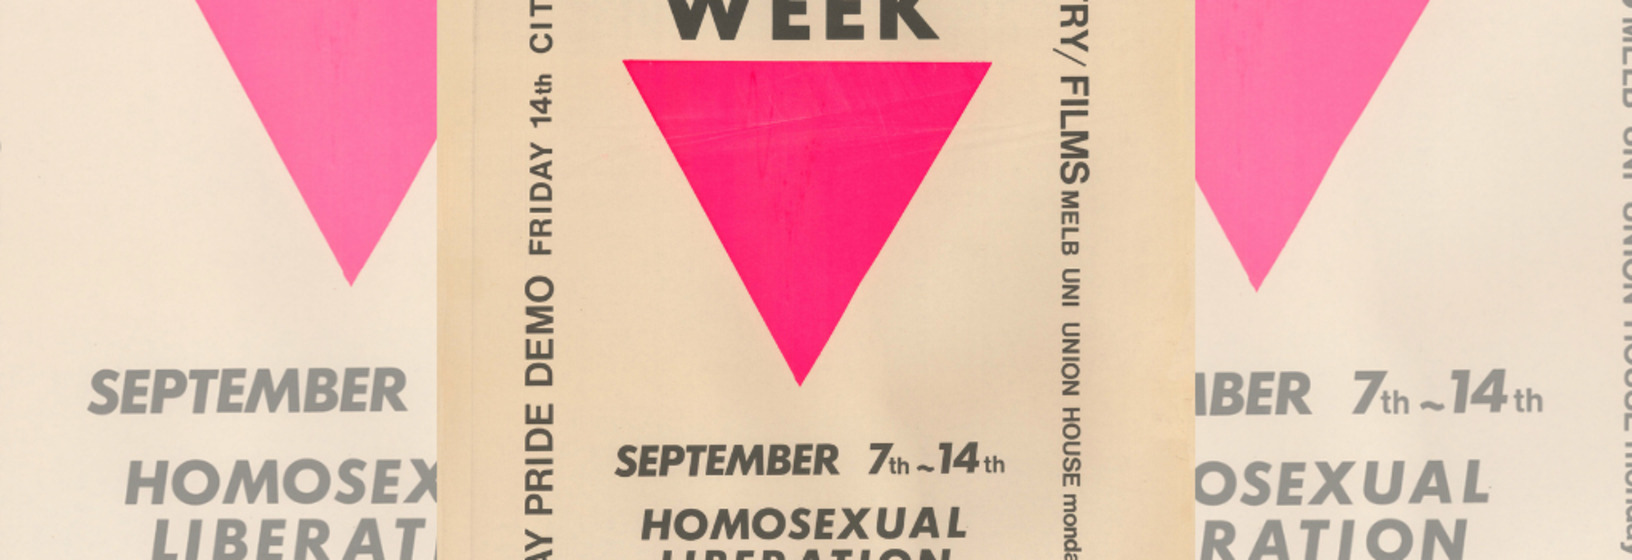 Poster with black lettering on white background surrounding a large inverted pink triangle, collaged to create a banner image.